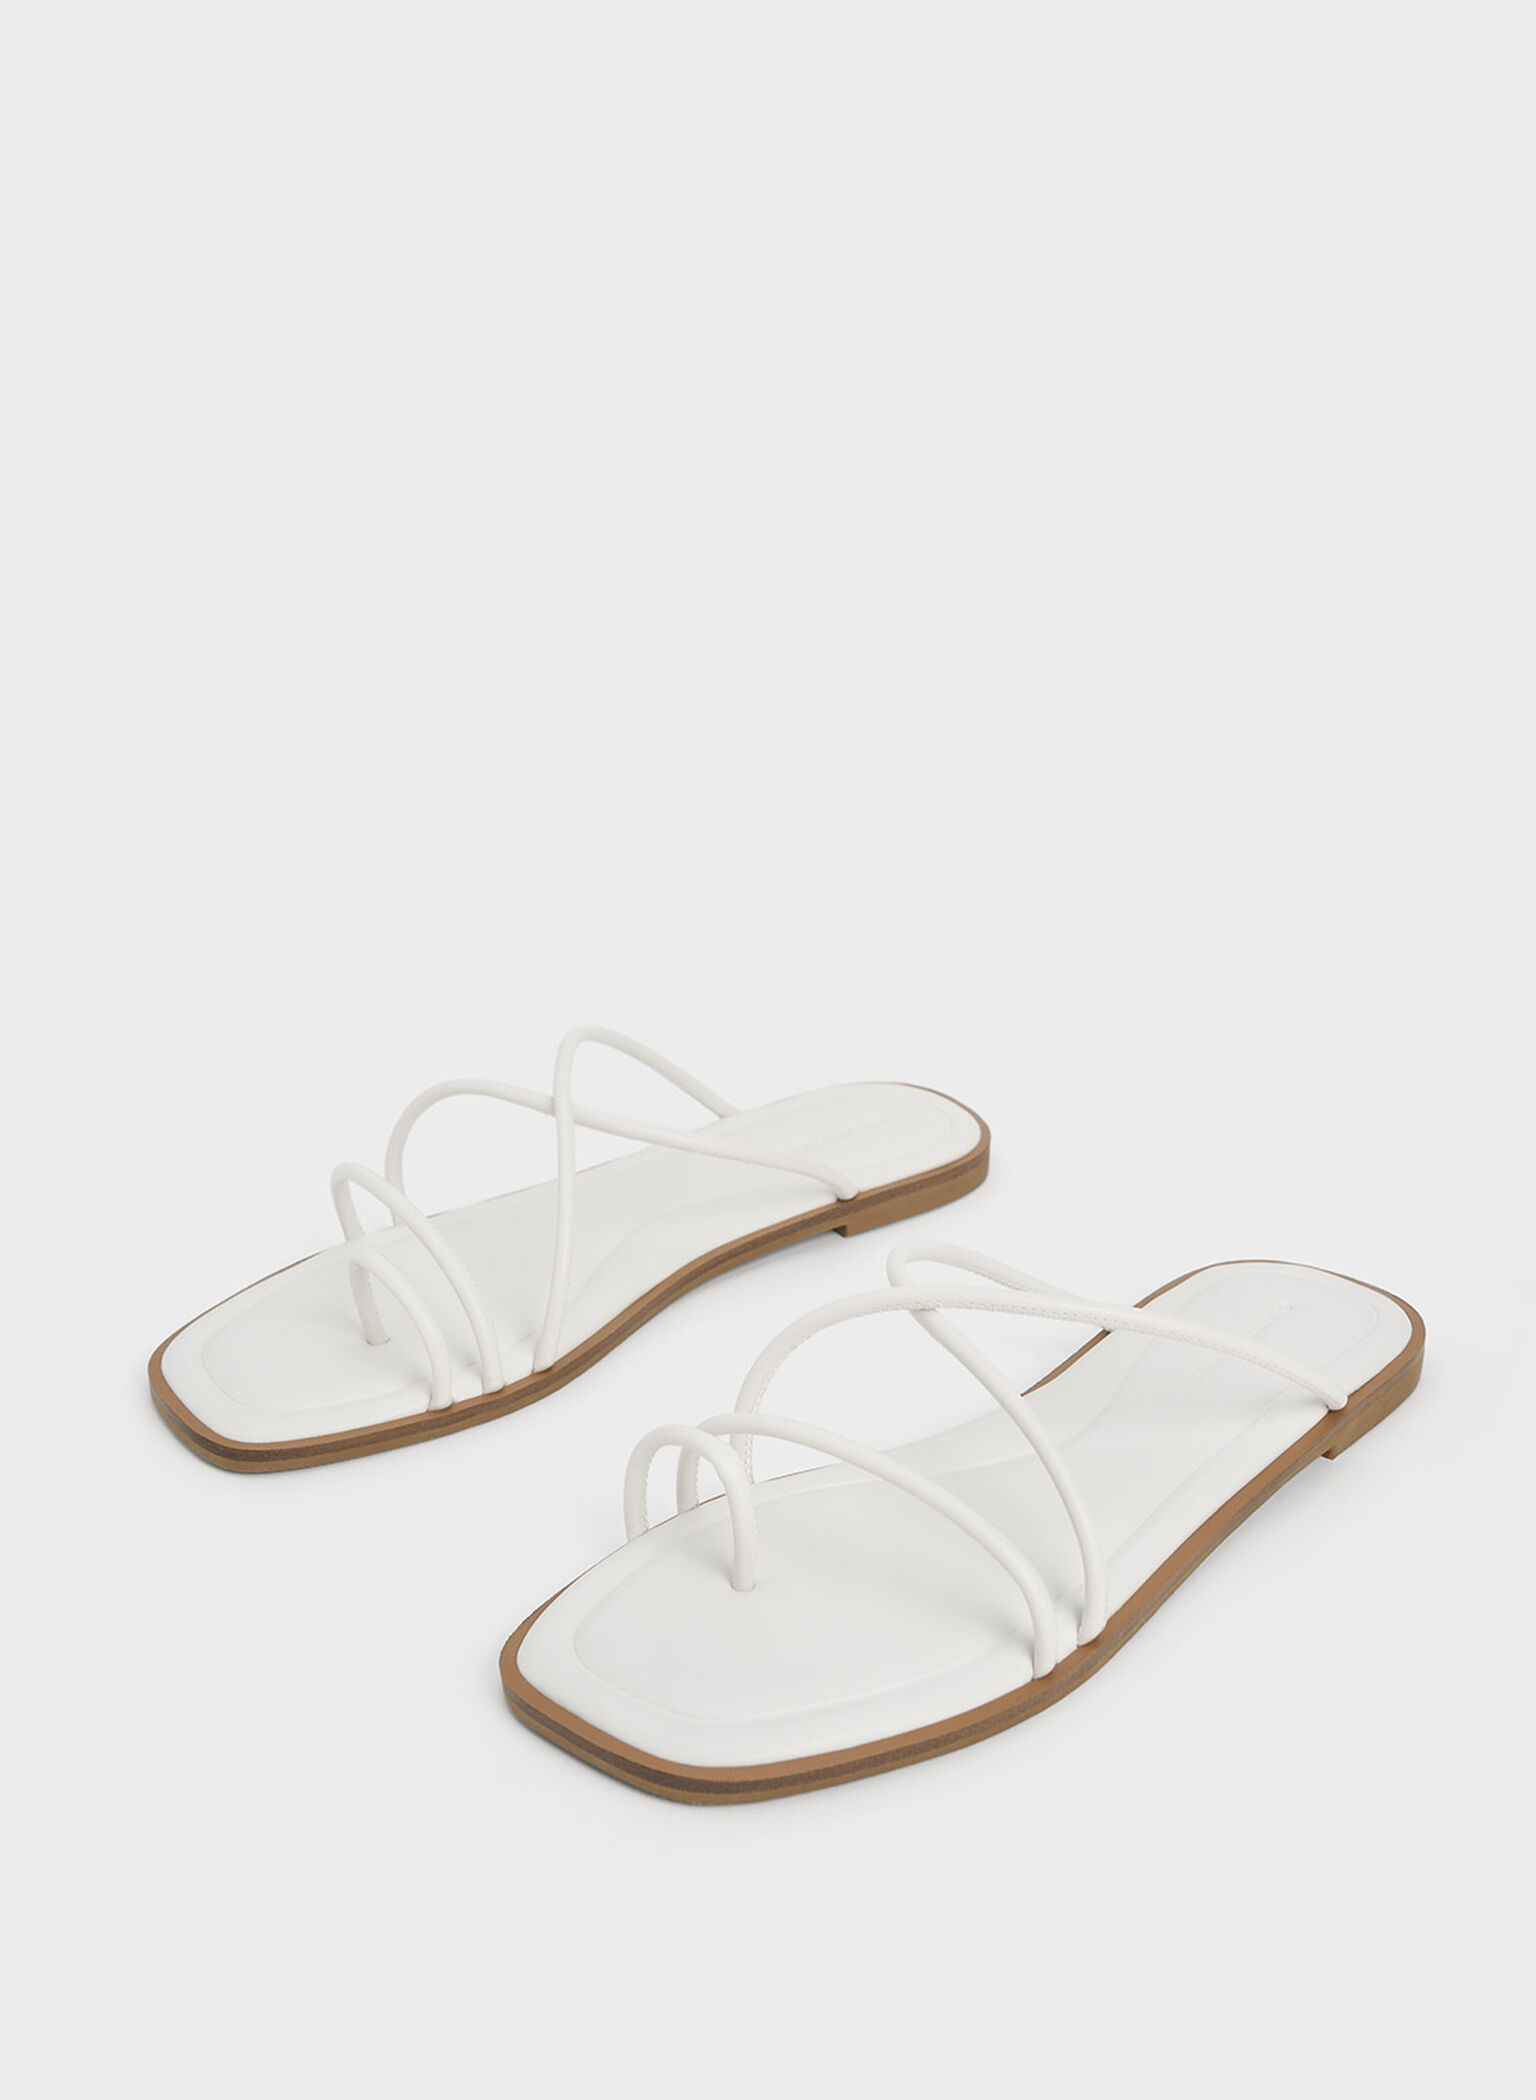 Meadow Strappy Toe-Ring Sandals, White, hi-res